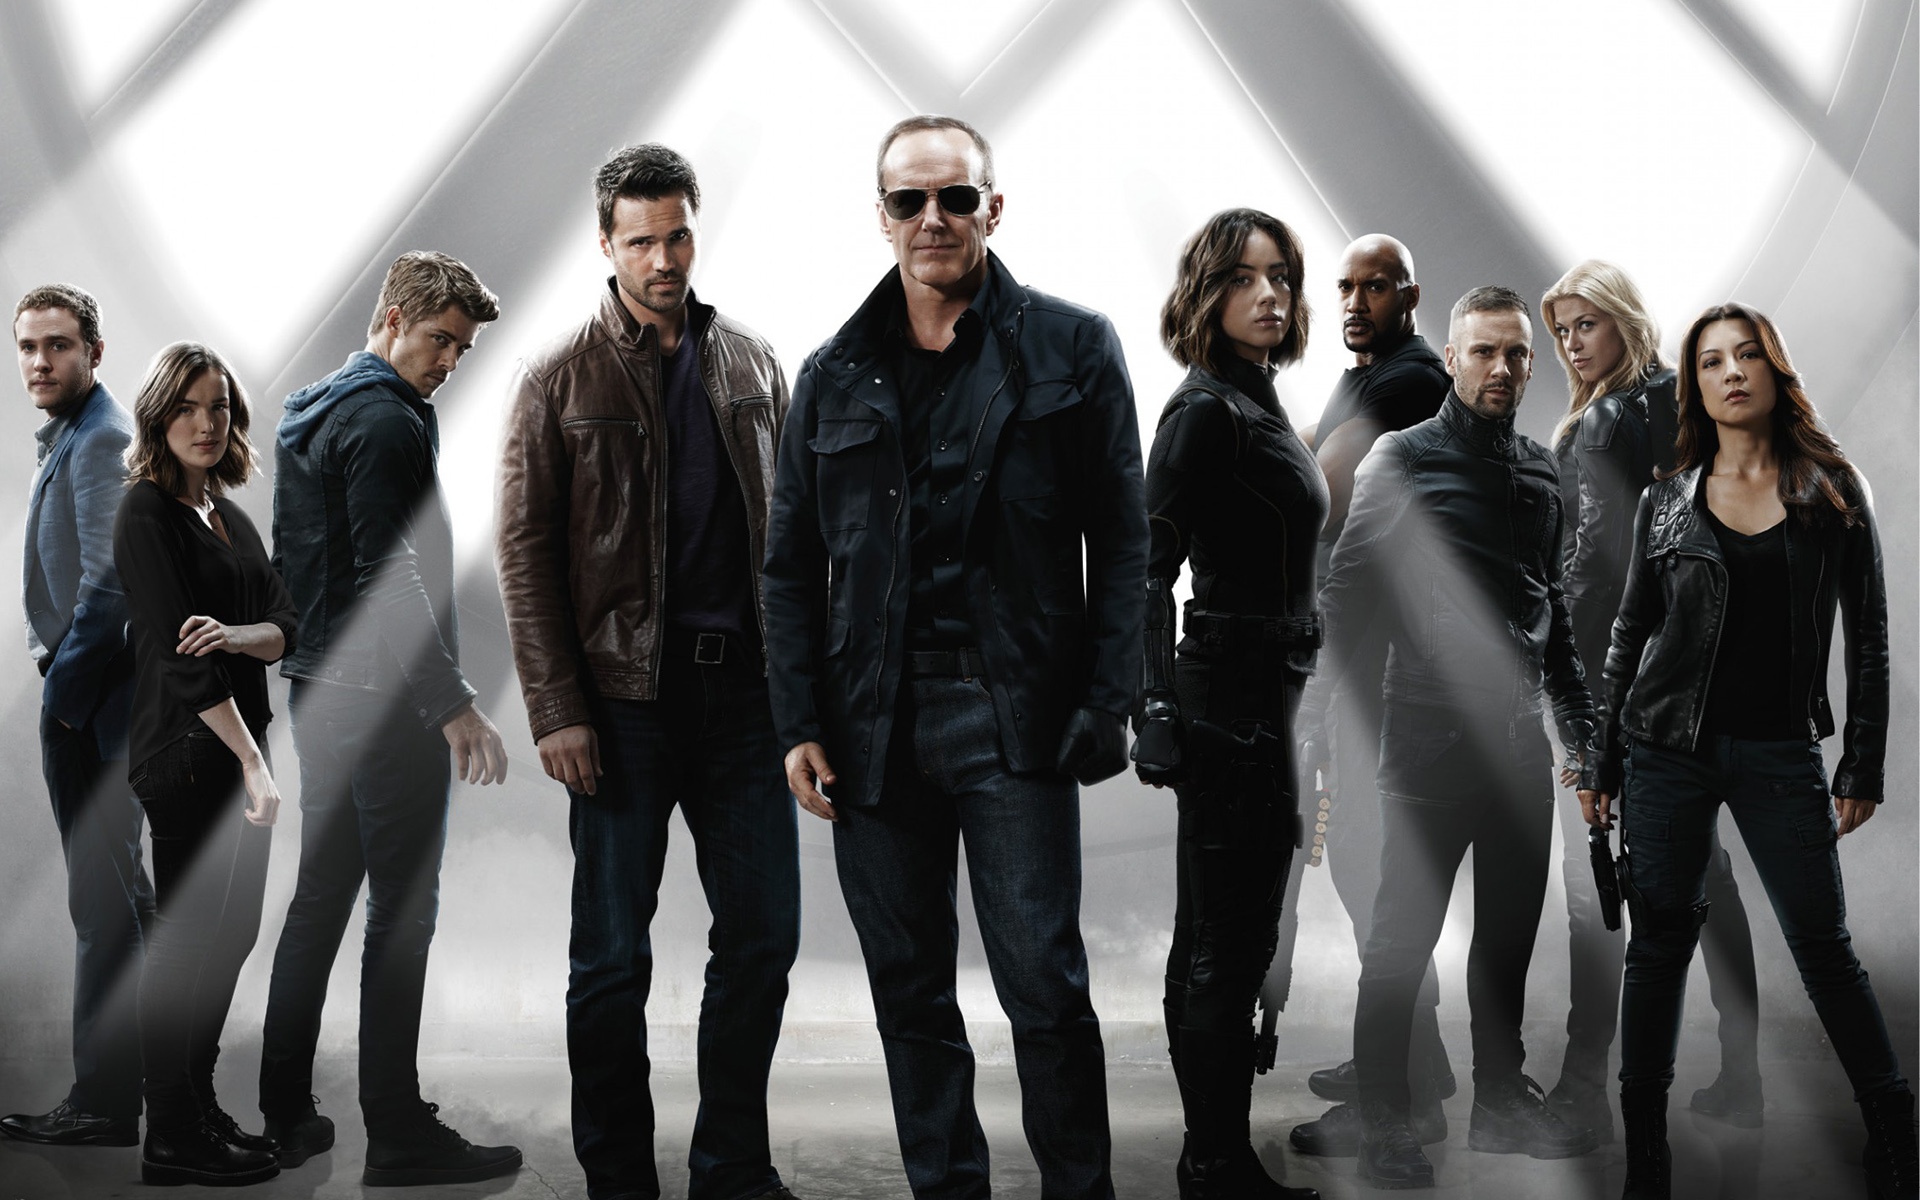 Agents Fitz & Simmons, Lincoln Campbell, Agents Ward & Coulson & Daisy (Skye) & Mack & Hunter & Morse & Melinda May (Yo-Yo&#039;s not shown, neither is the antagonist Talbot) http://www.cridutroll.fr/films-marvel-8-agents-shield-et-agent-carter/